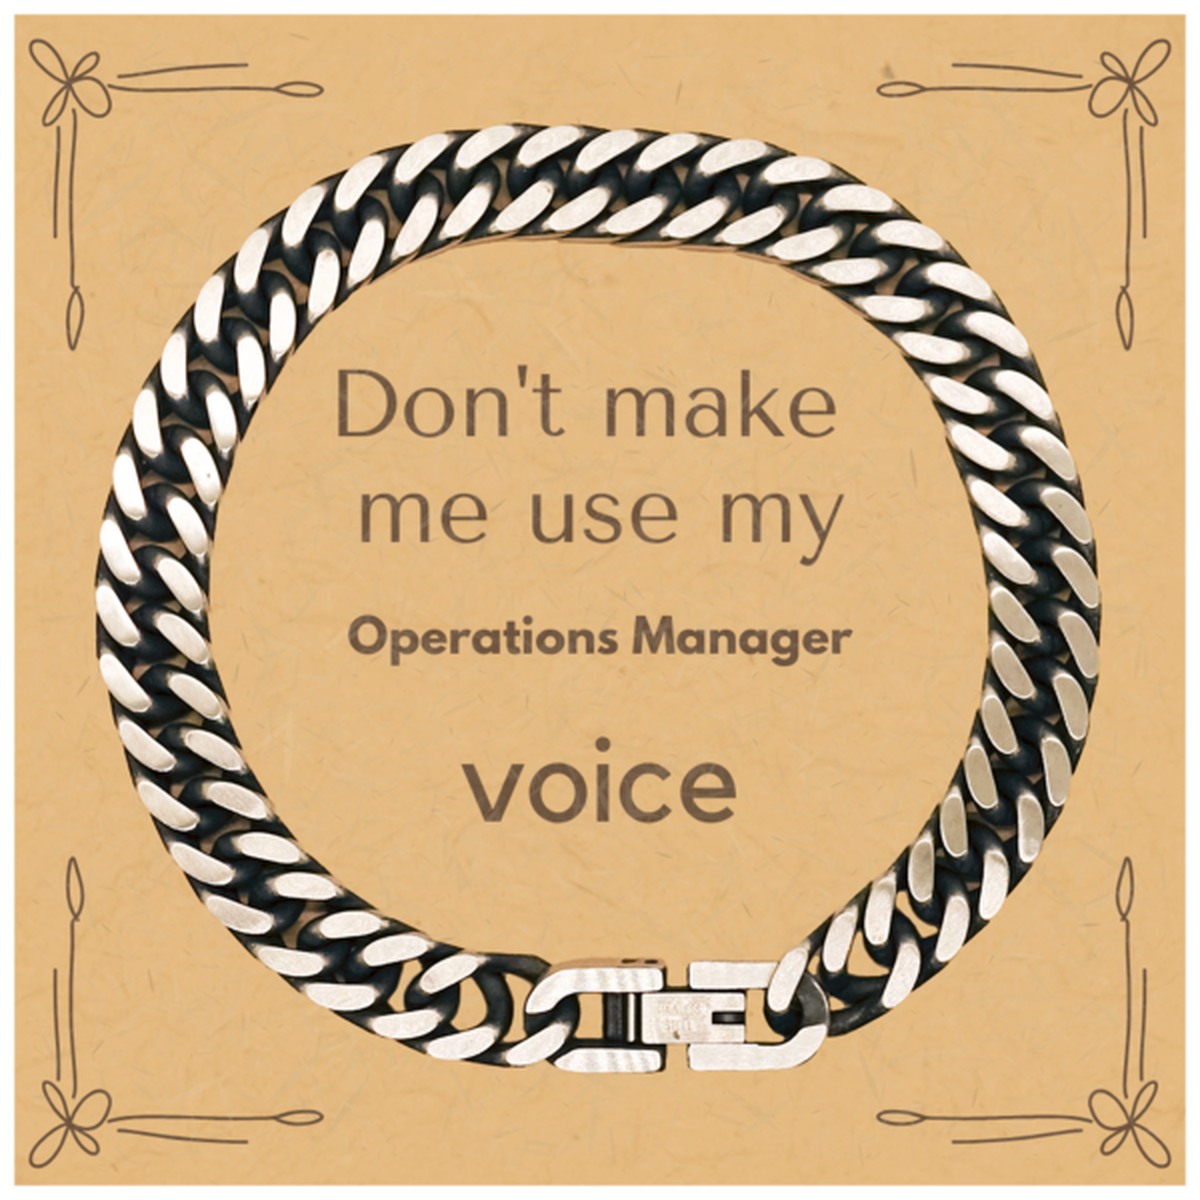 Don't make me use my Operations Manager voice, Sarcasm Operations Manager Card Gifts, Christmas Operations Manager Cuban Link Chain Bracelet Birthday Unique Gifts For Operations Manager Coworkers, Men, Women, Colleague, Friends